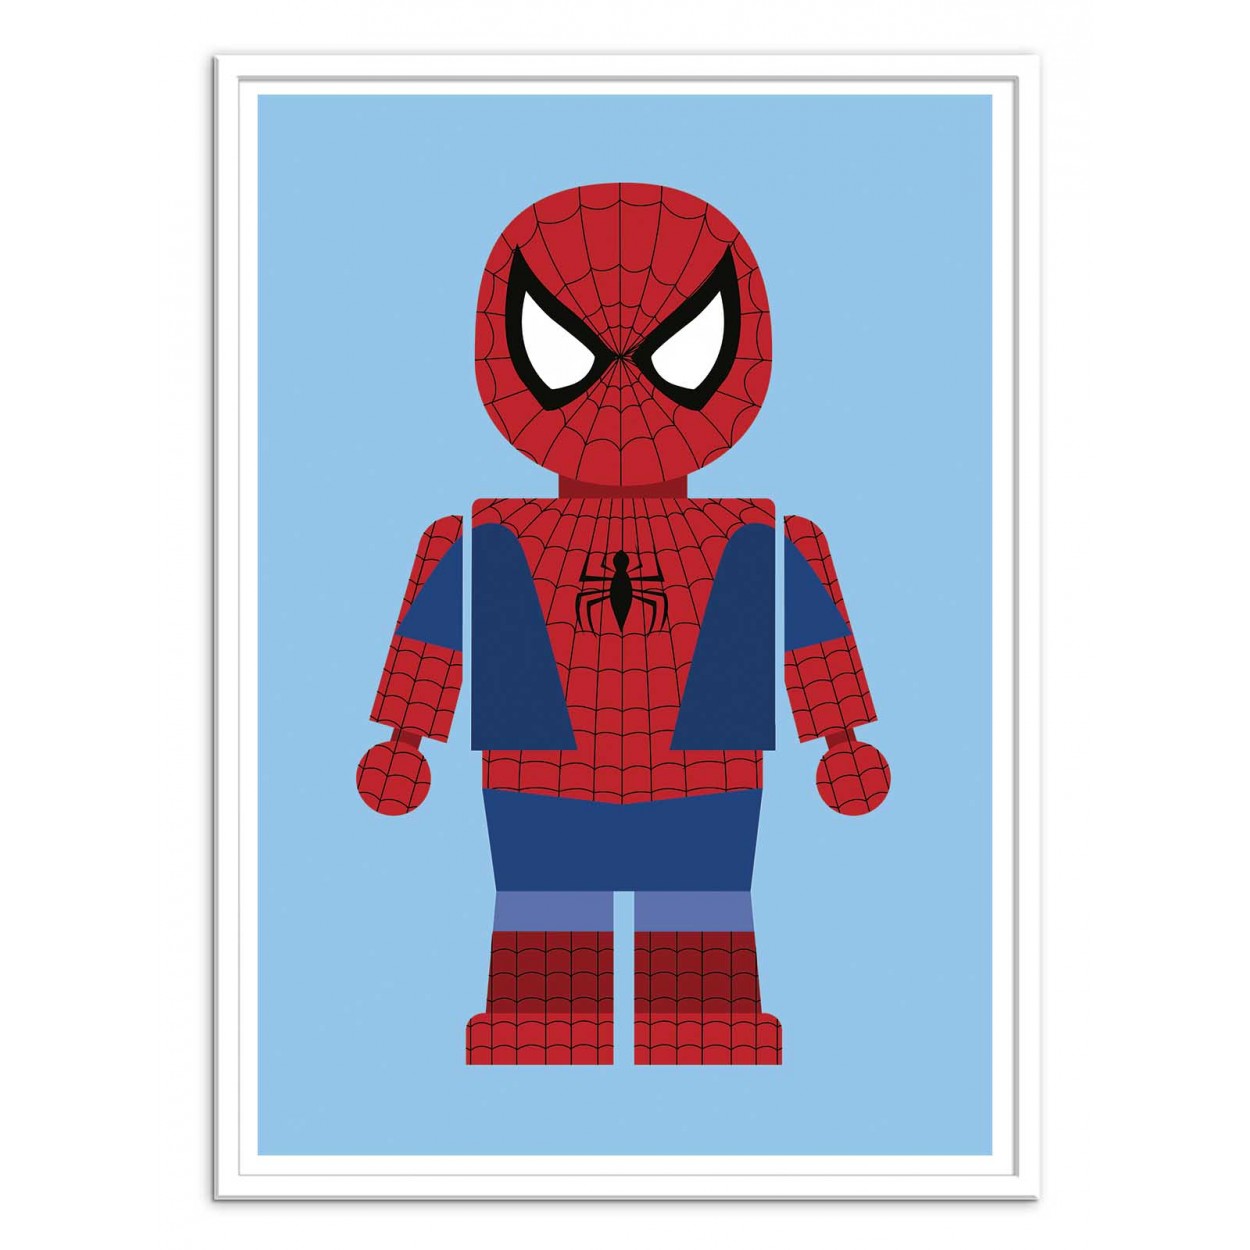 Art-Poster Children and Babies - Spiderman Toy, by Rafa Gomes